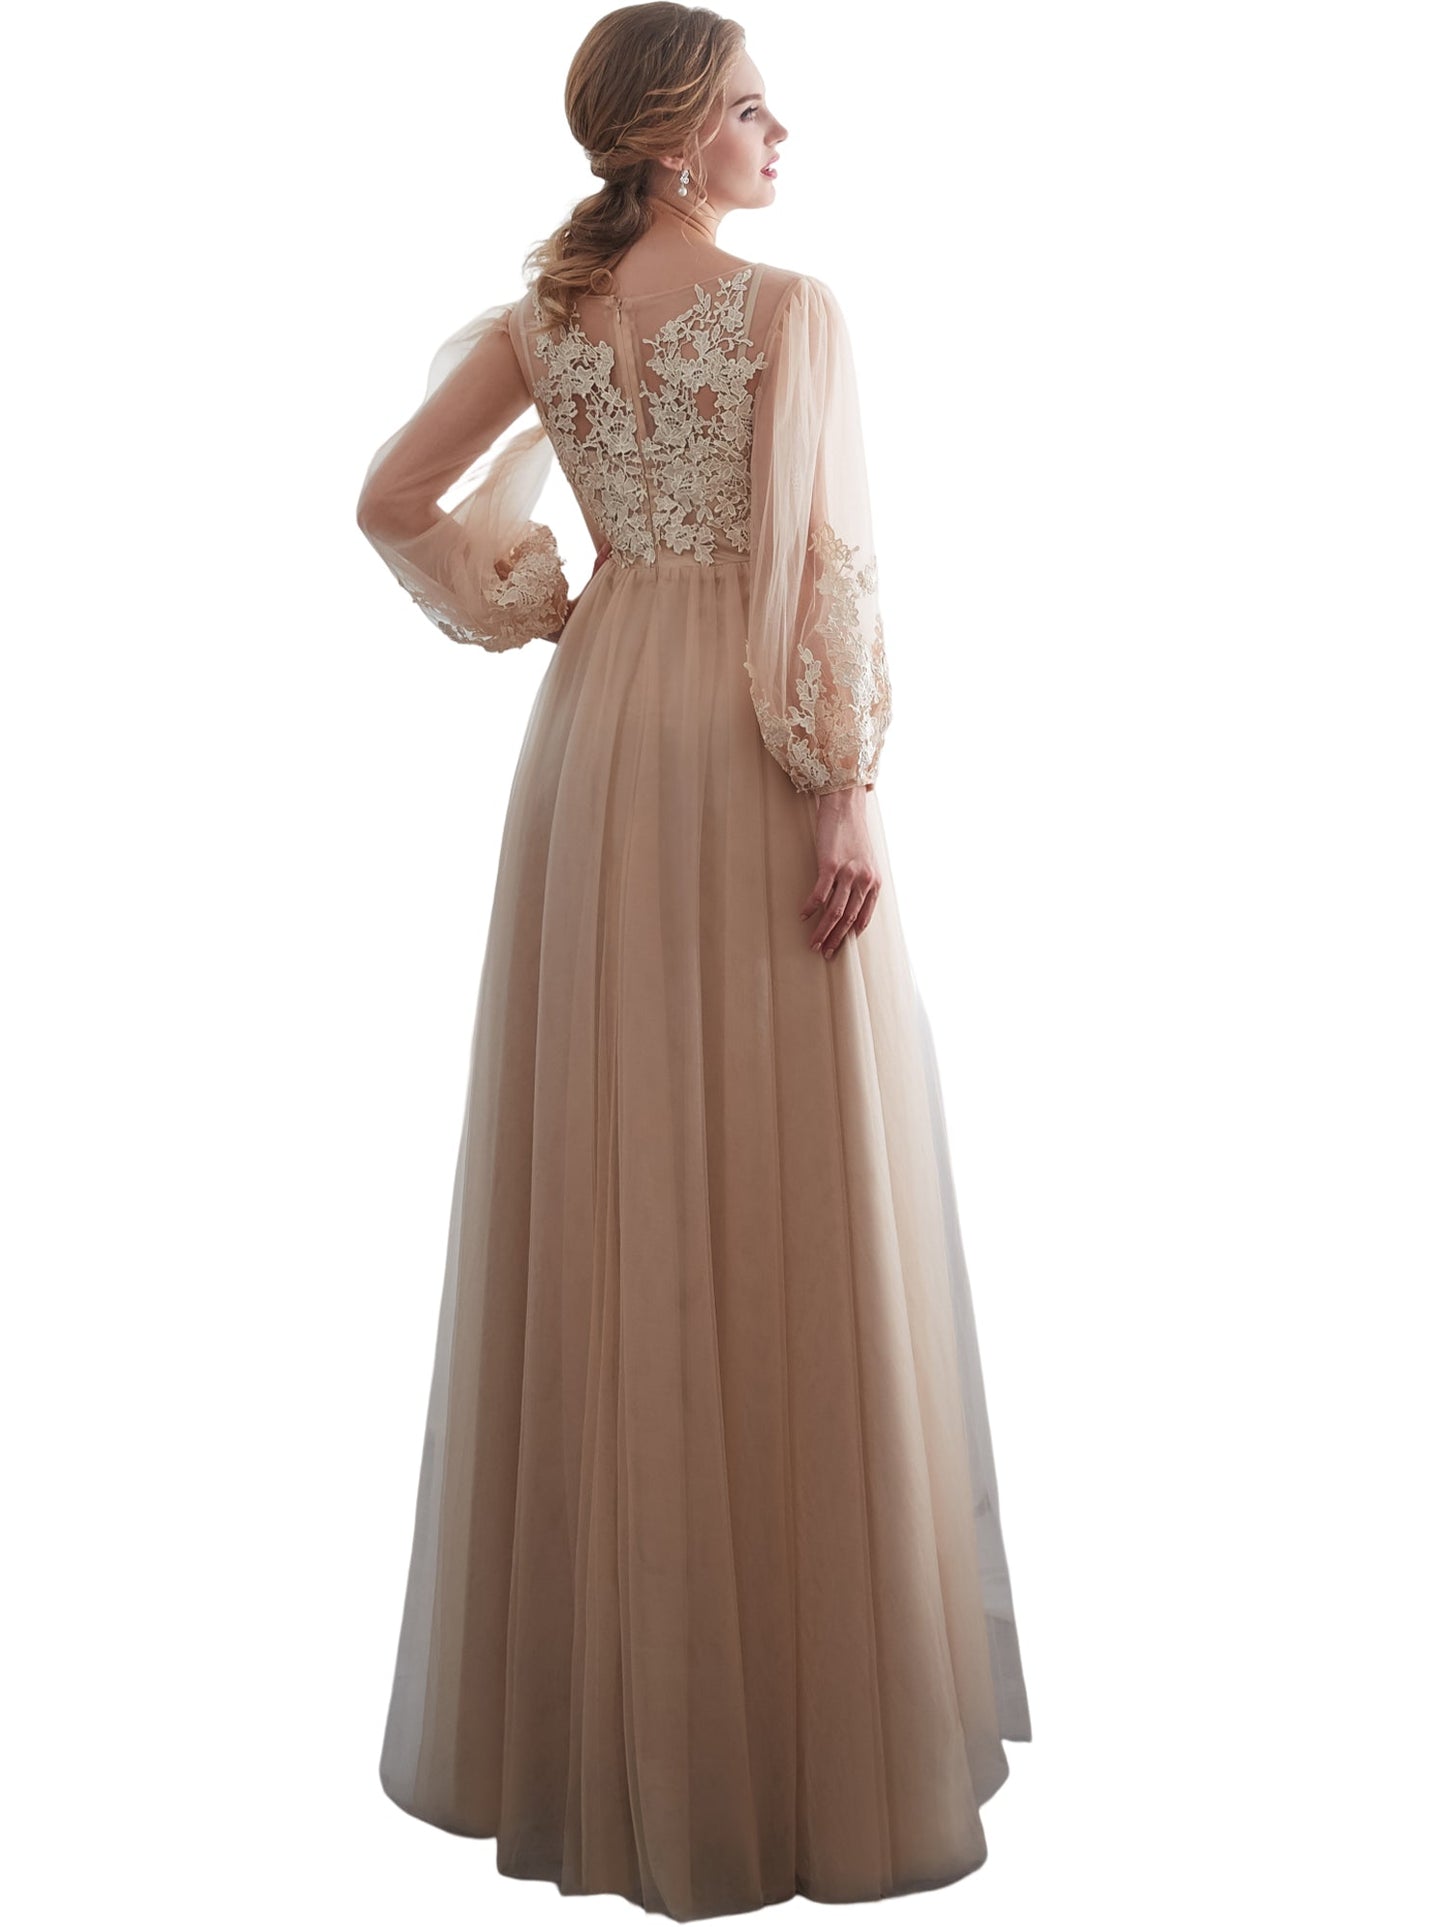 Lace A-Line Jewel Neck Long Sleeves-Prom Dress-GD100213